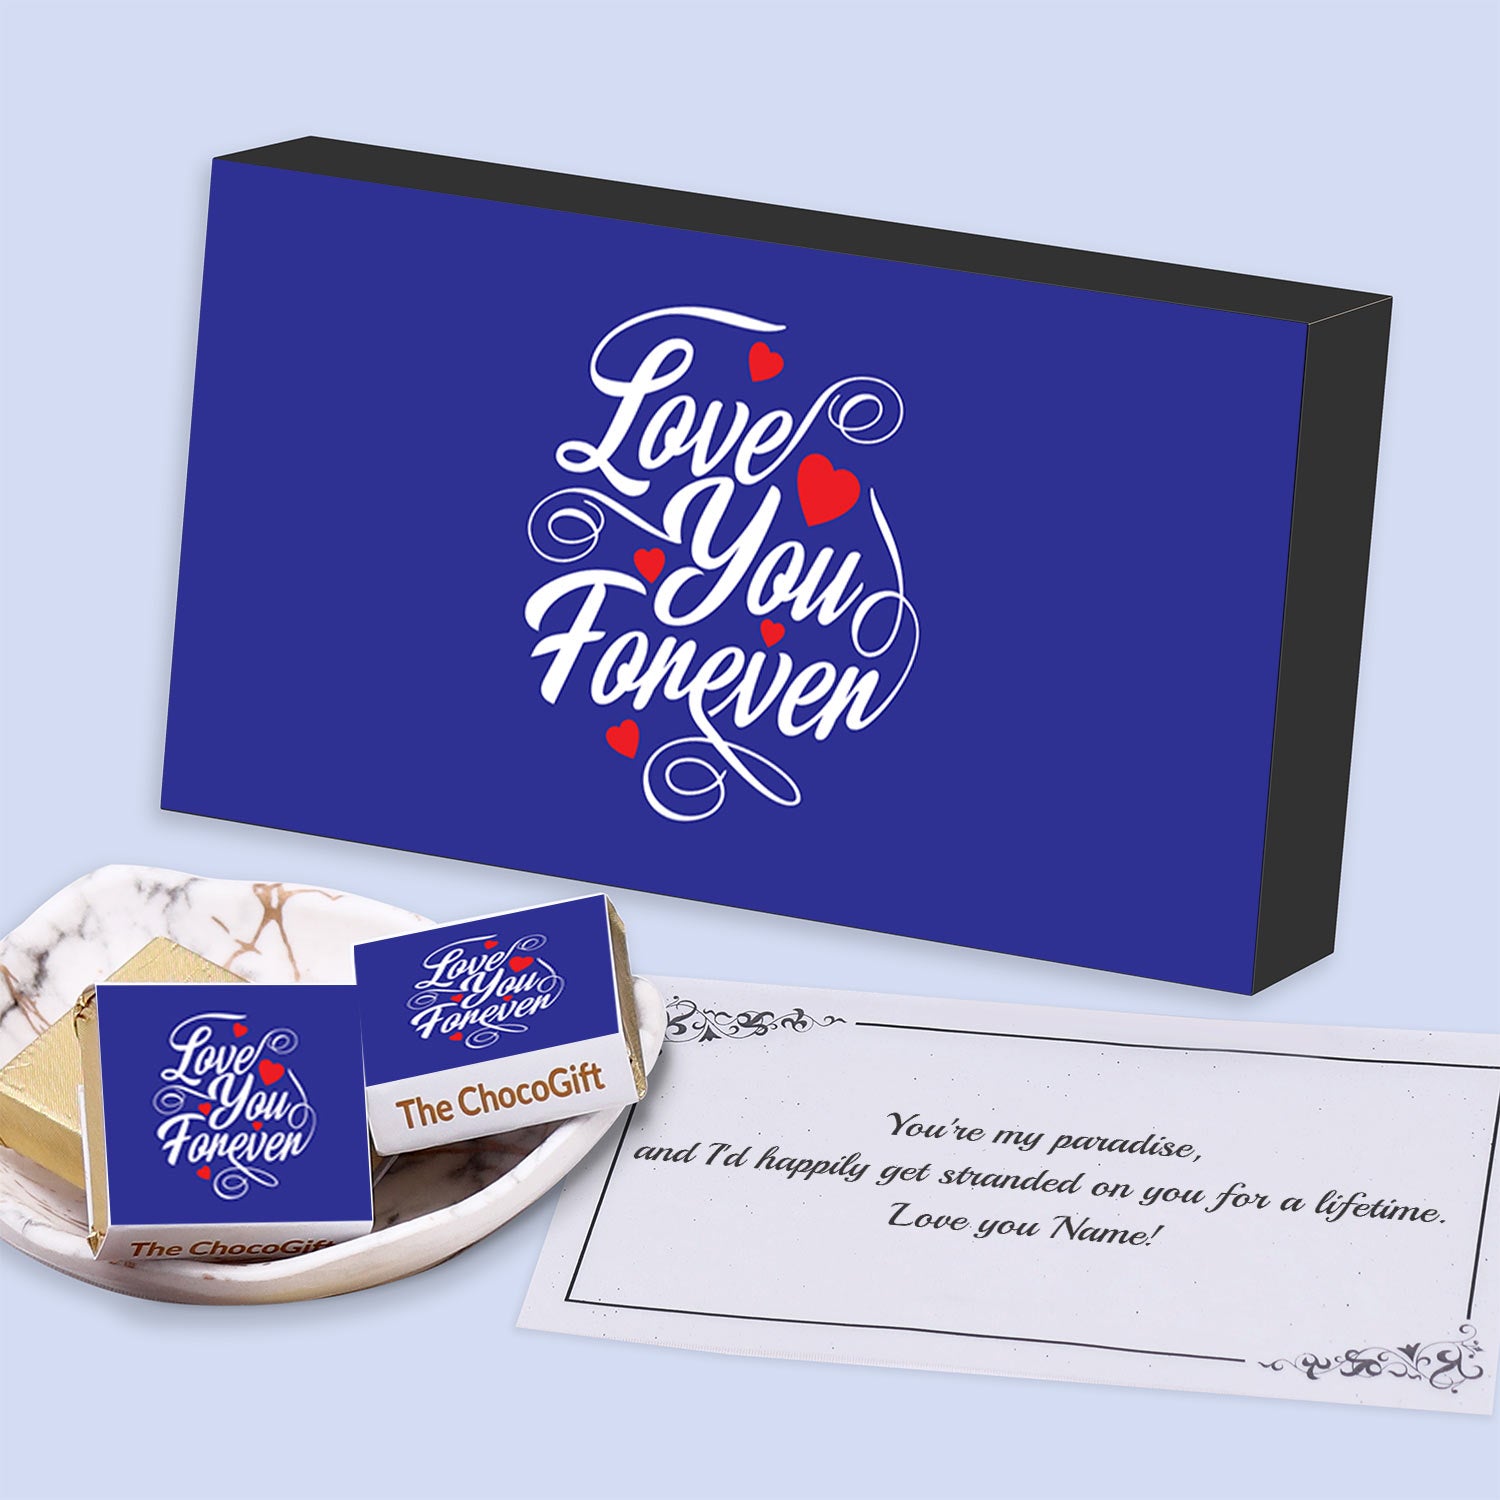 Print love you forever message on chocolate wrappers